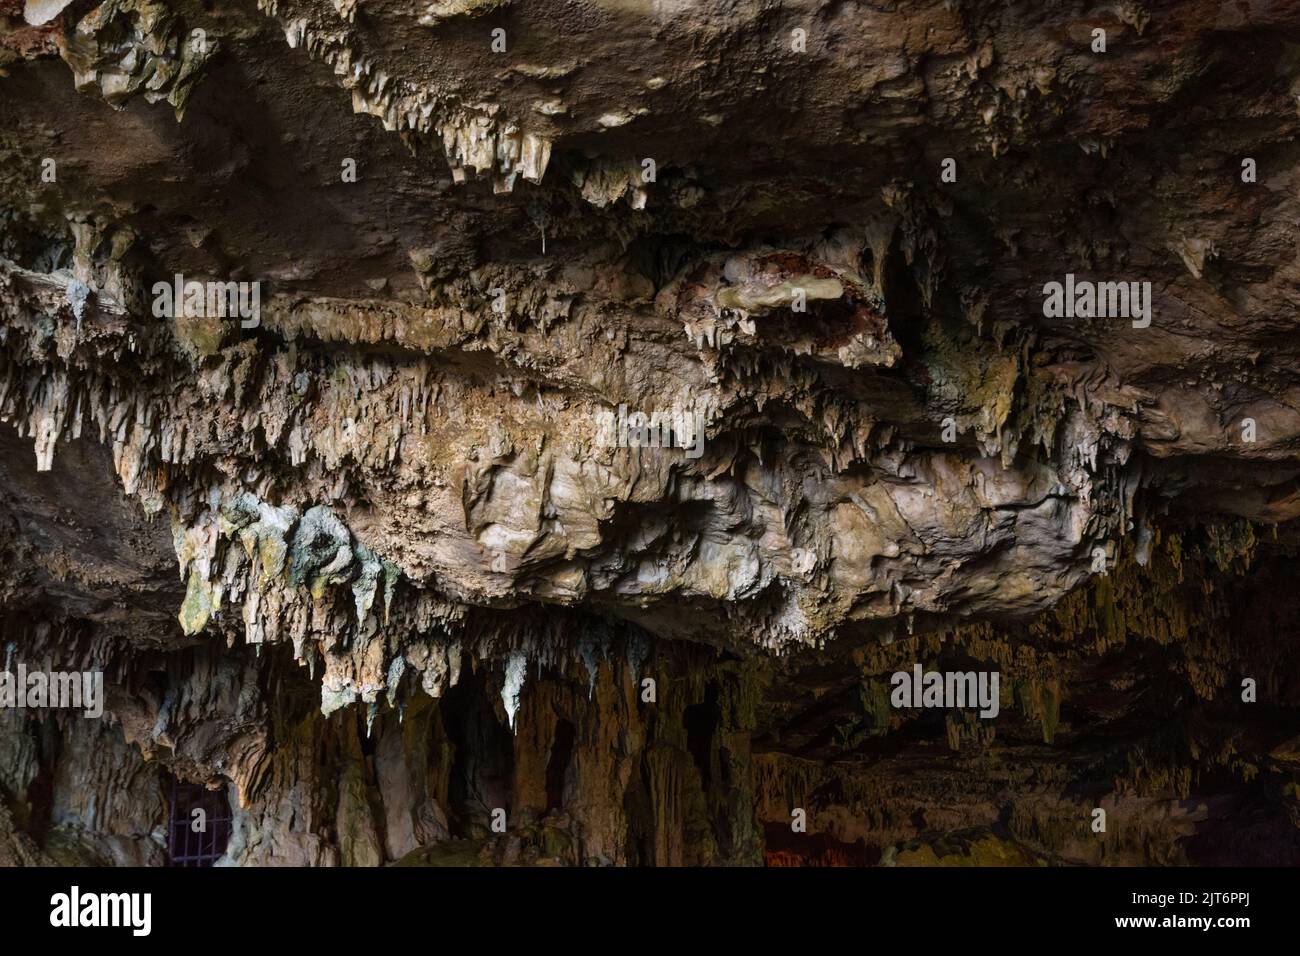 Horizontal view of the ceiling of a salty sea cave, Mediterranean, with a close-up view of the stalagtites. Stock Photo